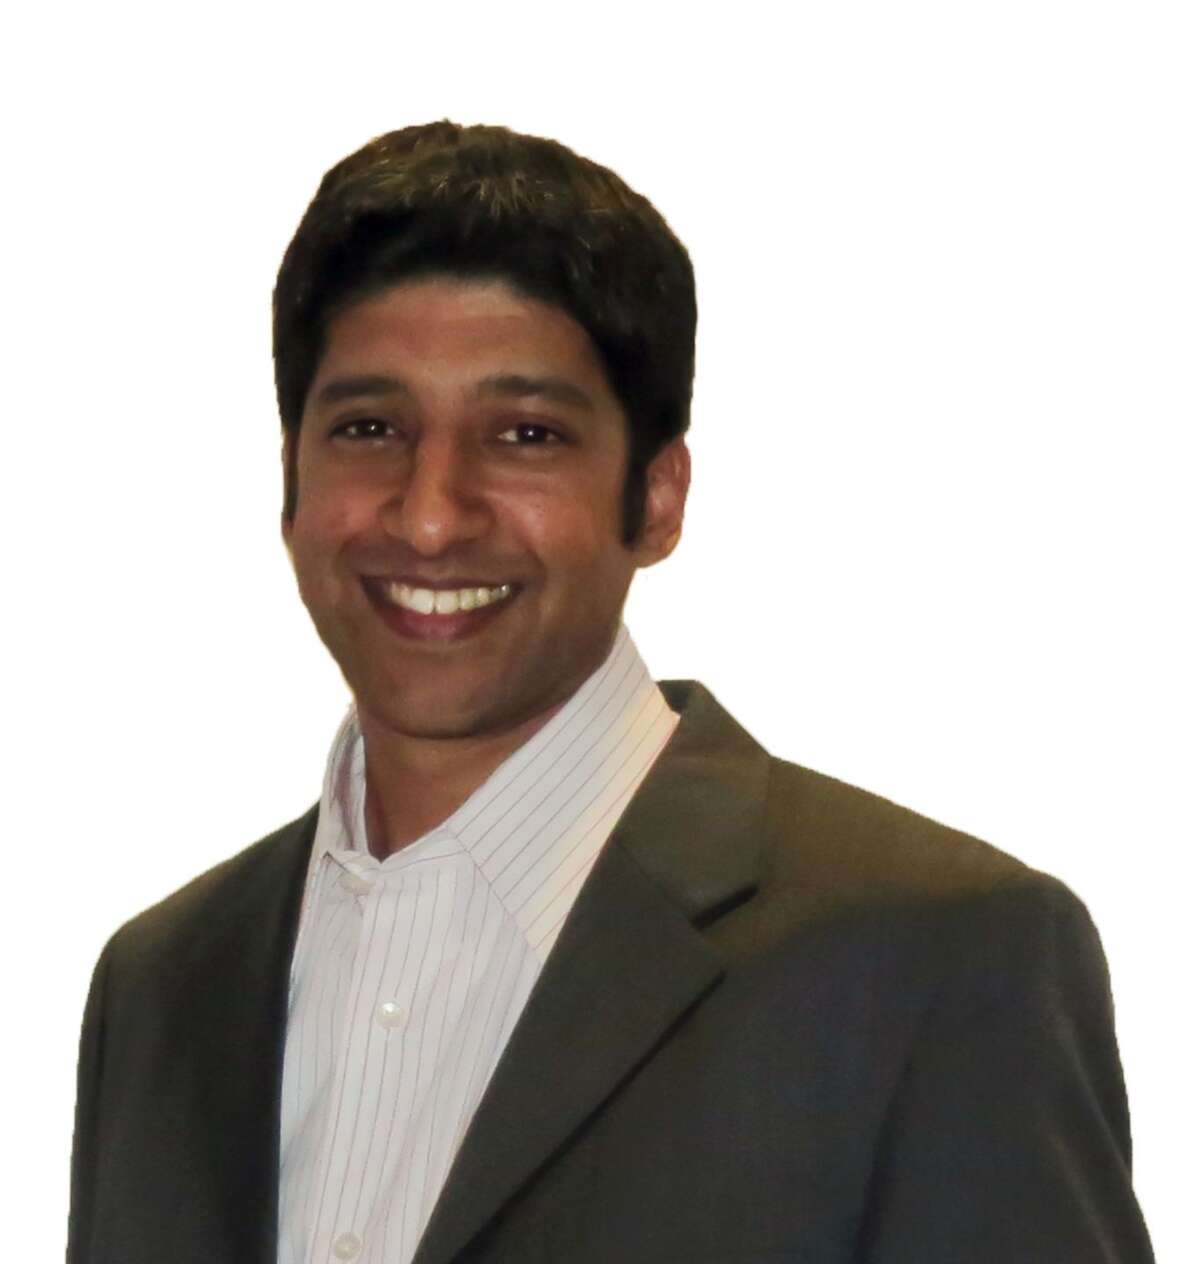 Akshai Ramakrishnan, structural project manager, is joining the JQ Infrastructure Houston team. Ramakrishnan will be working on the Singing Hills Recreation Facility for the city of Dallas, and a new hospital in Conway, Ark. The JQ Infrastructure engineering firm provides structural, civil, environmental and surveying services to municipal and industrial clients in the critical water resources and infrastructure markets.